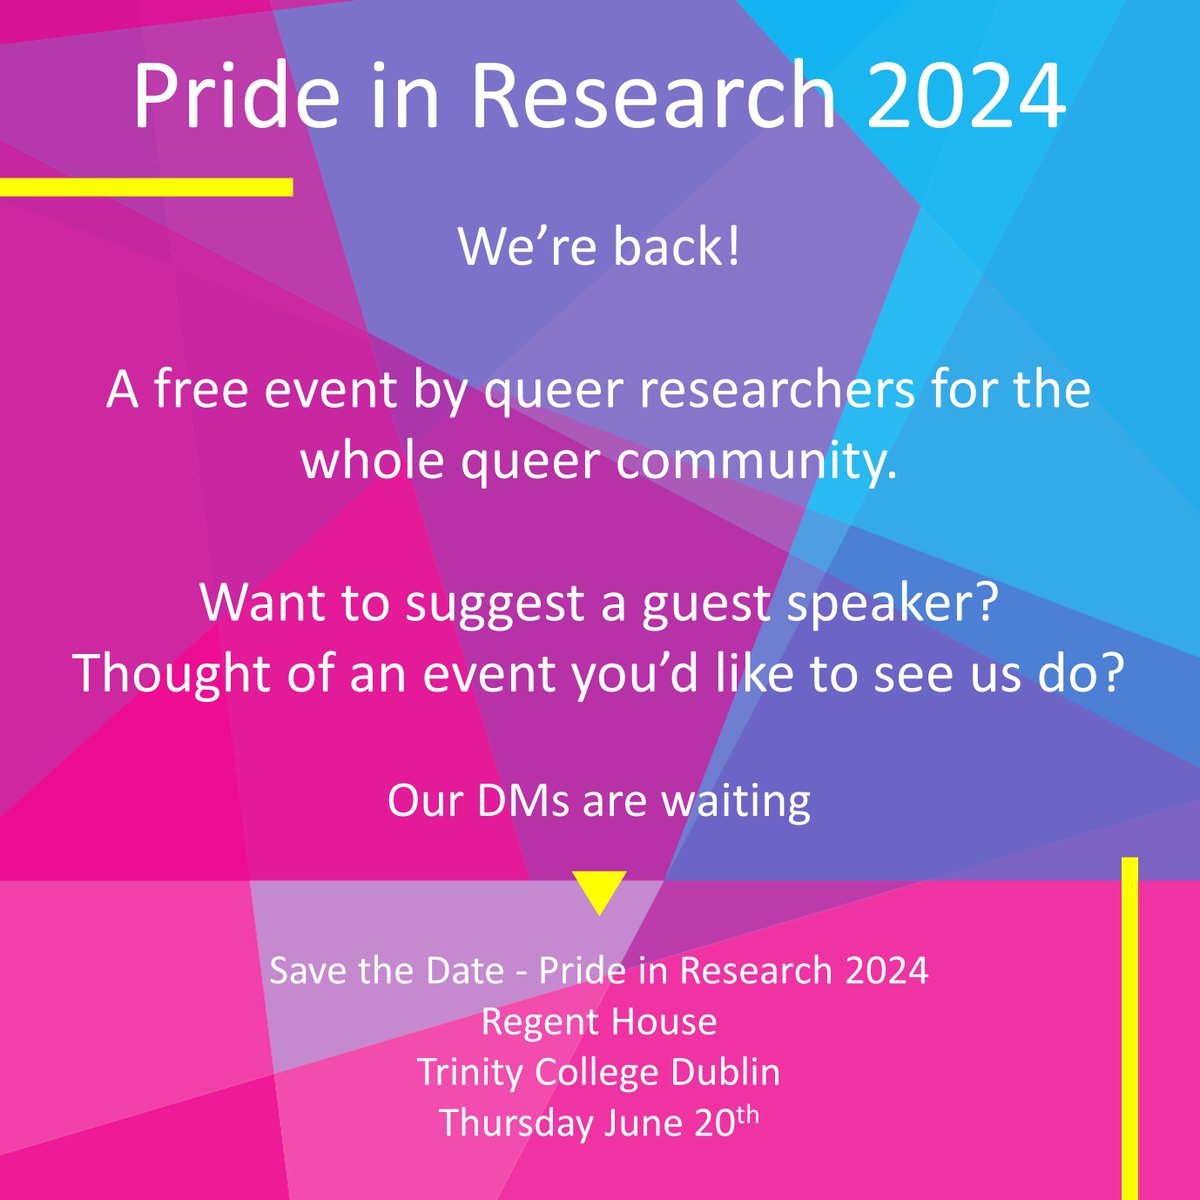 PRIDE in Research at TCD (@PRIDEinResearch) on Twitter photo 2024-04-05 08:53:59